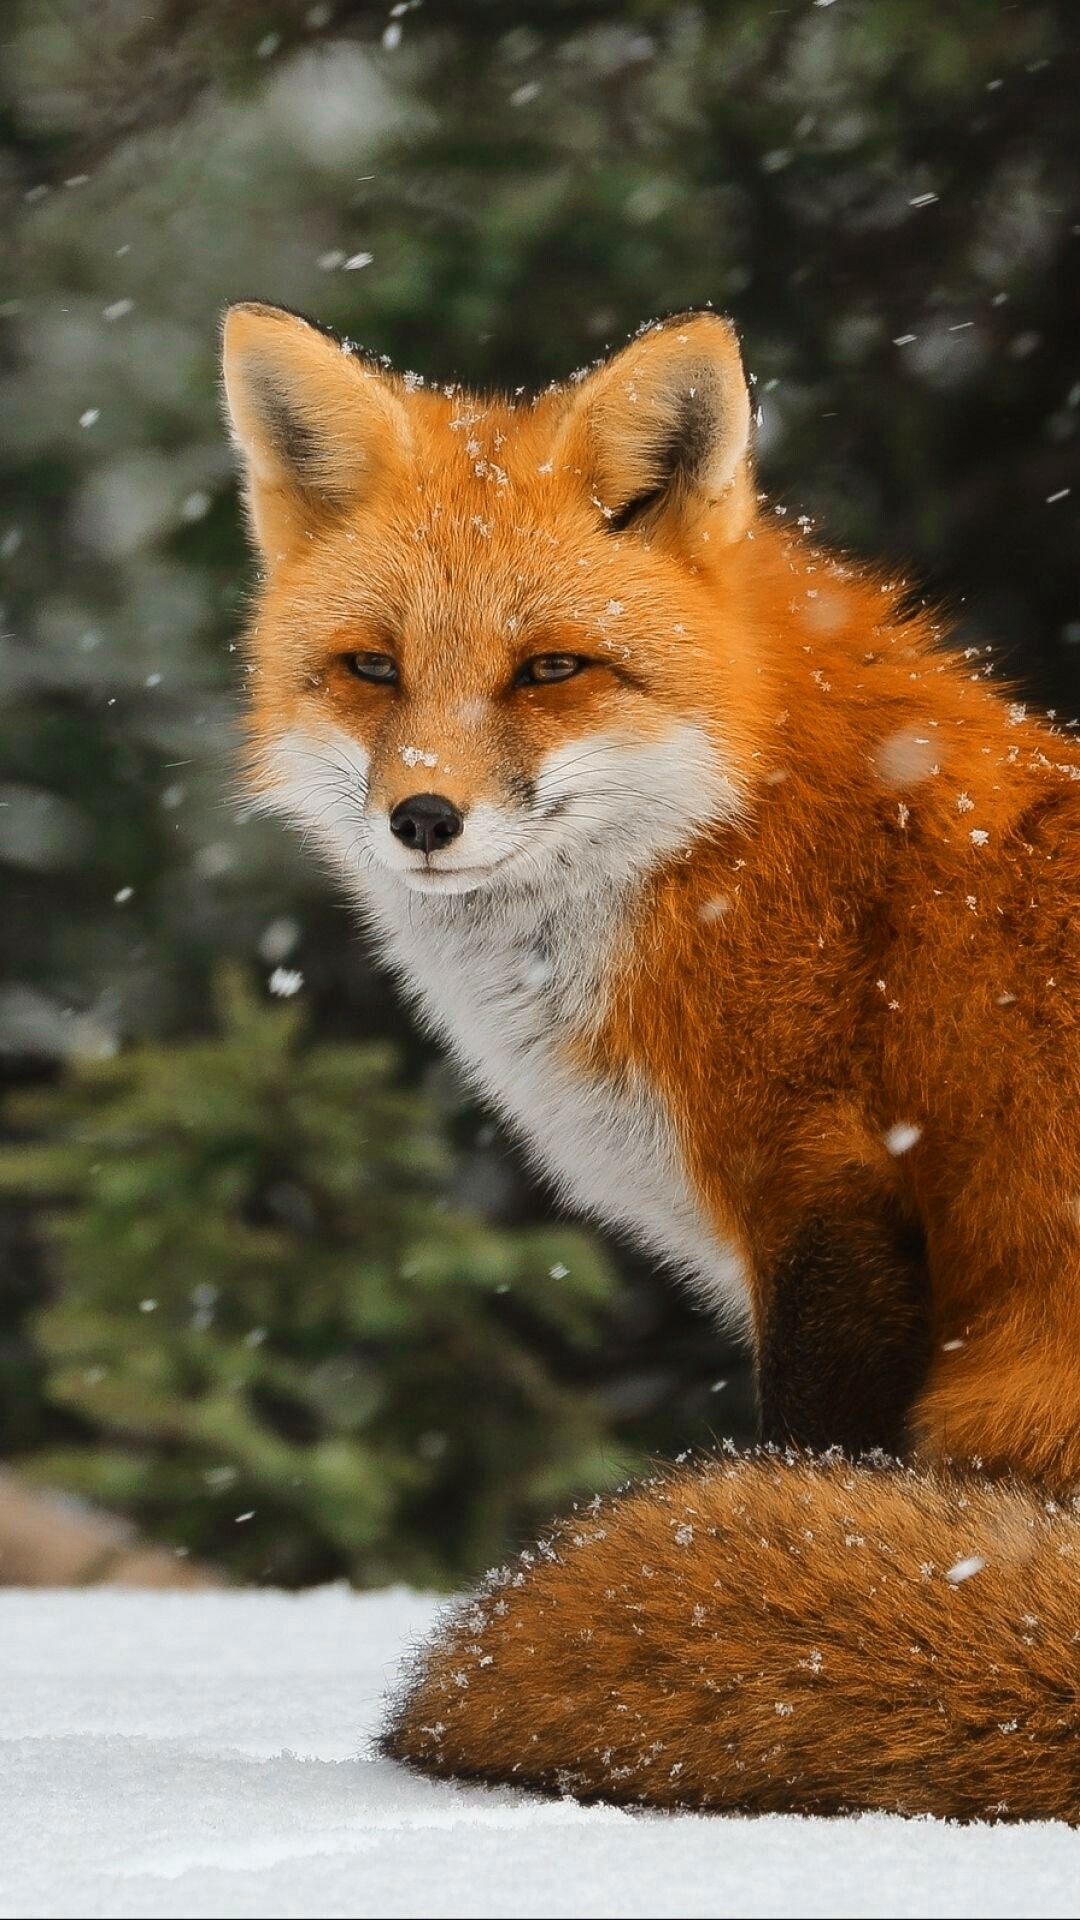 Fox: Capable of learning from experience, which has earned it the “cunning” namesake in literature. 1080x1920 Full HD Background.